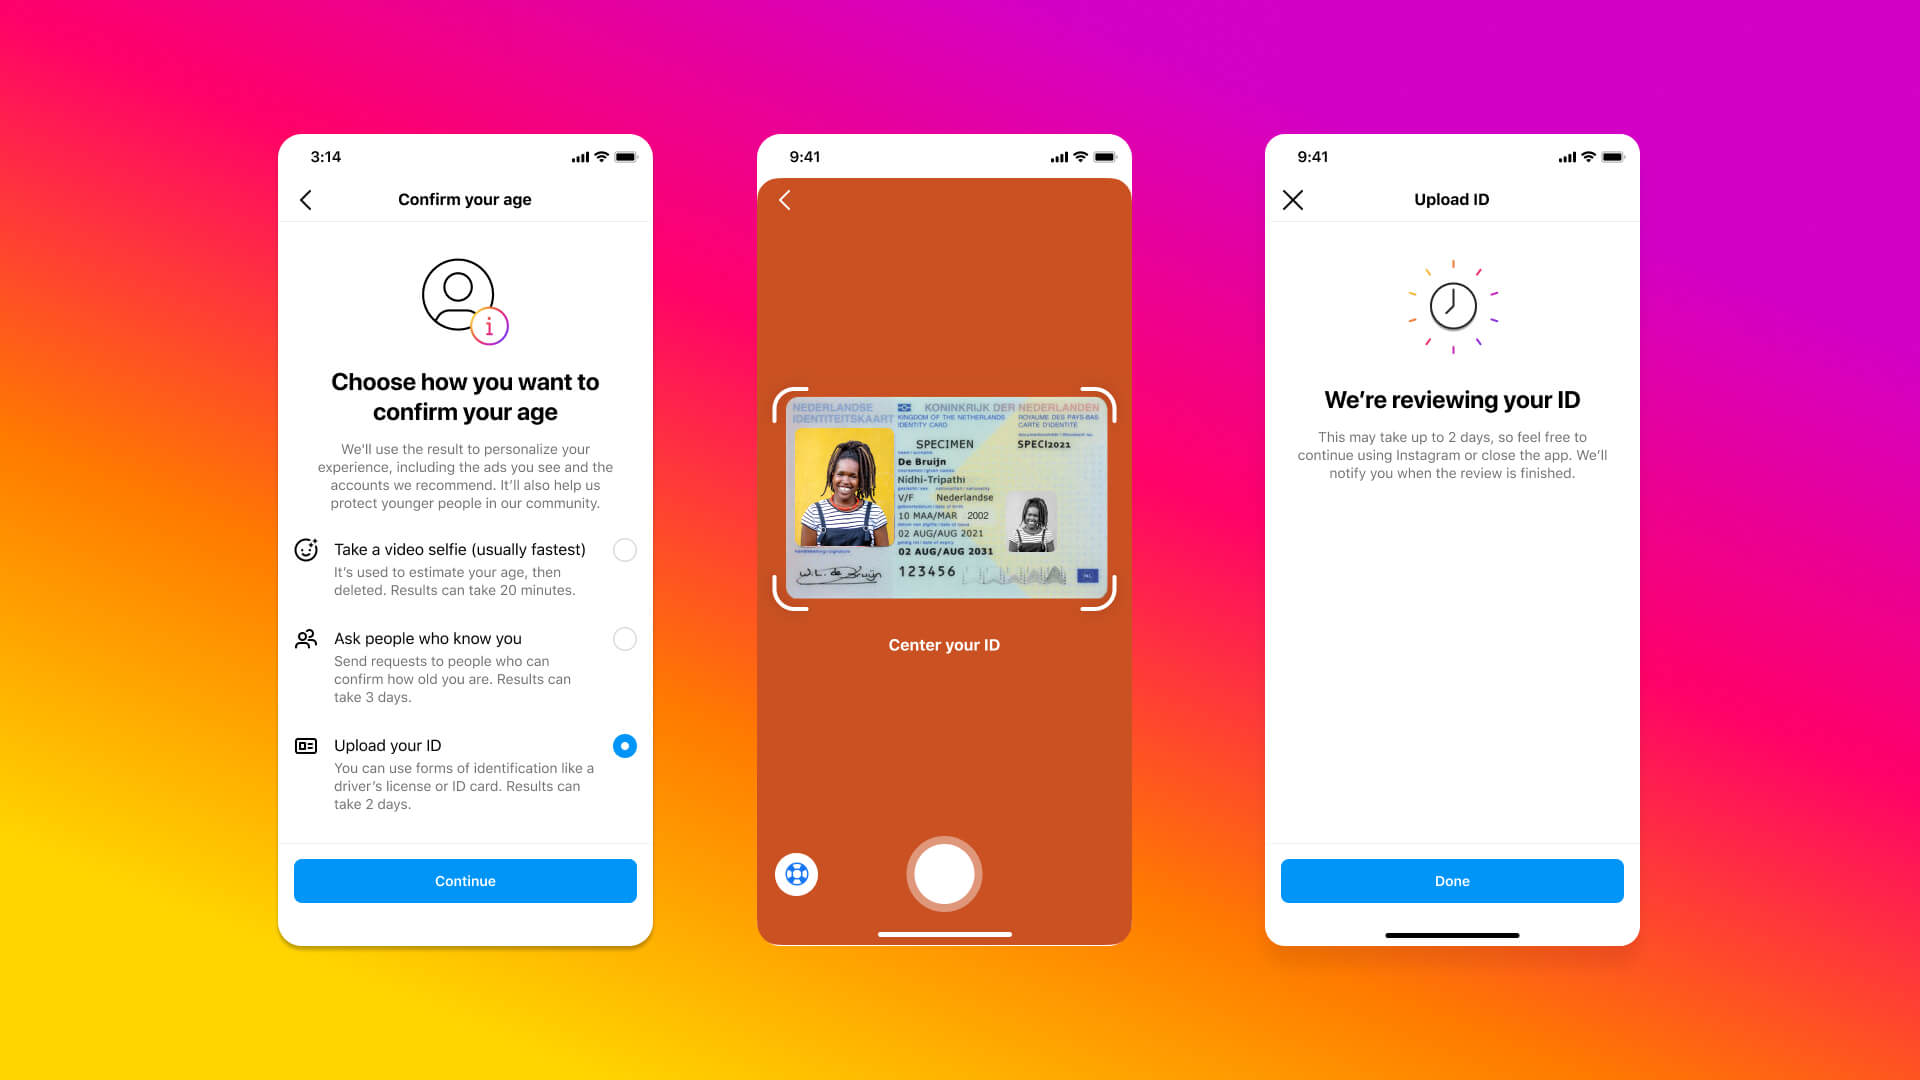 Instagram tests new age verification tools for 18 and over accounts, including video selfies – TechCrunch